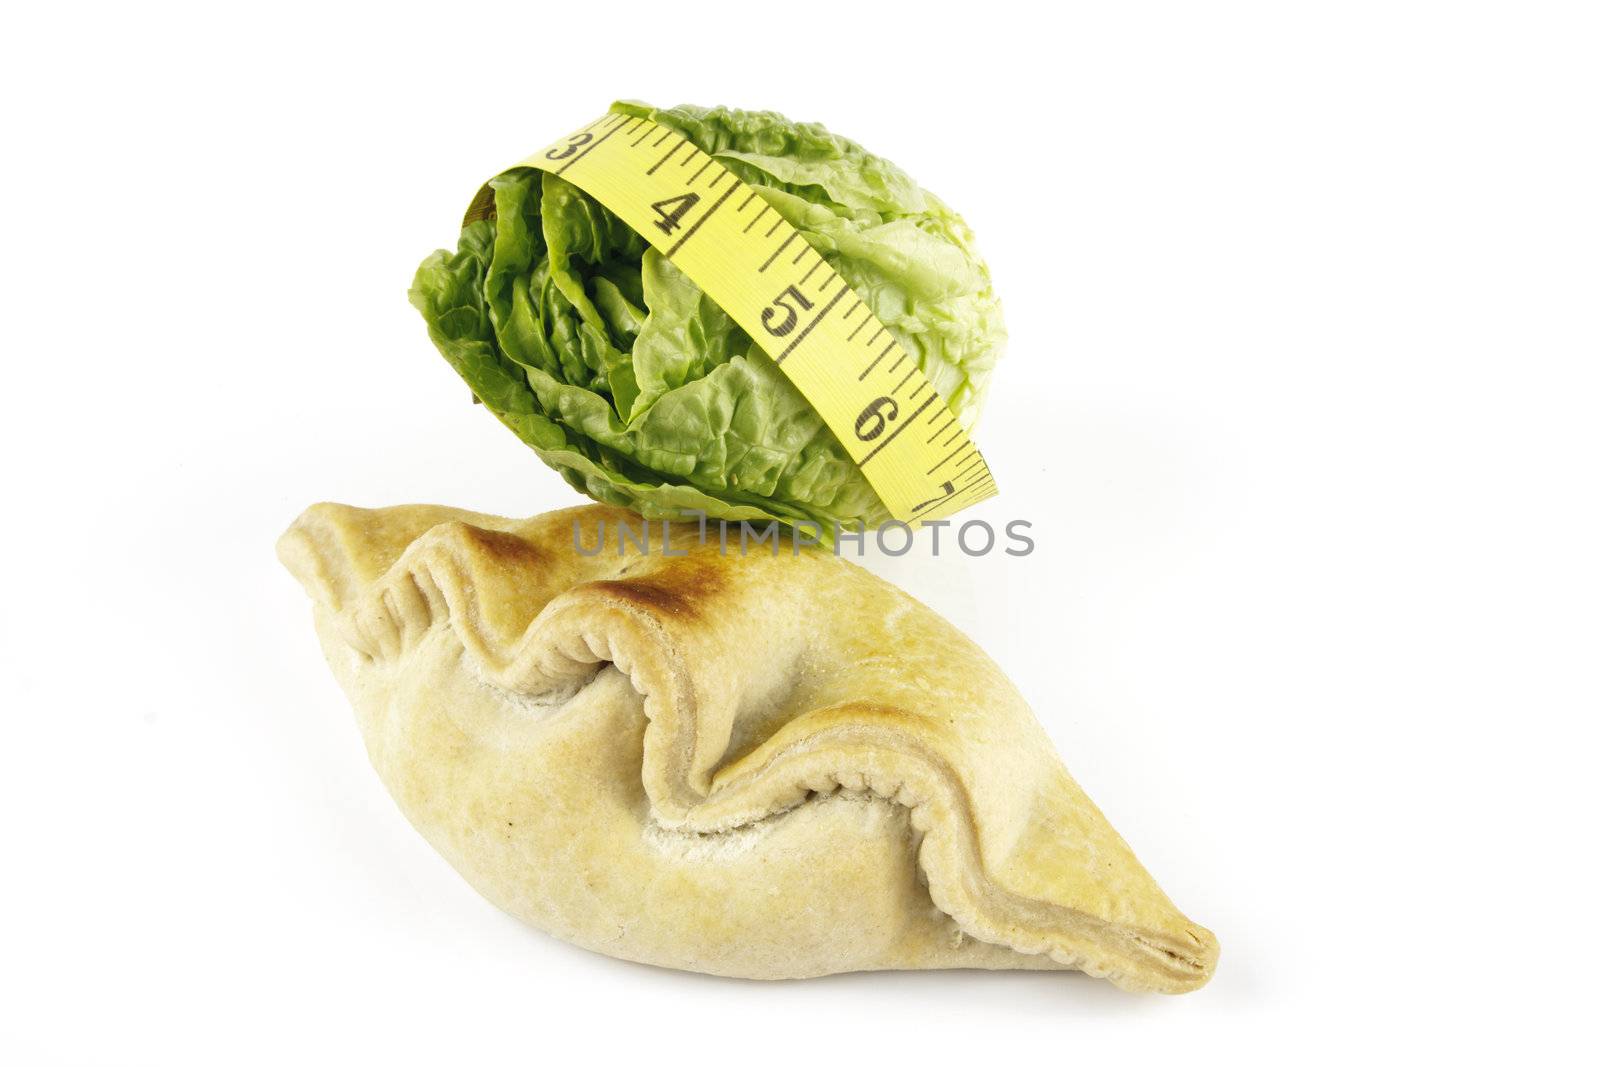 Contradiction between healthy food and junk food using a green salad lettace and pasty with a yellow tape measure on a reflective white background 